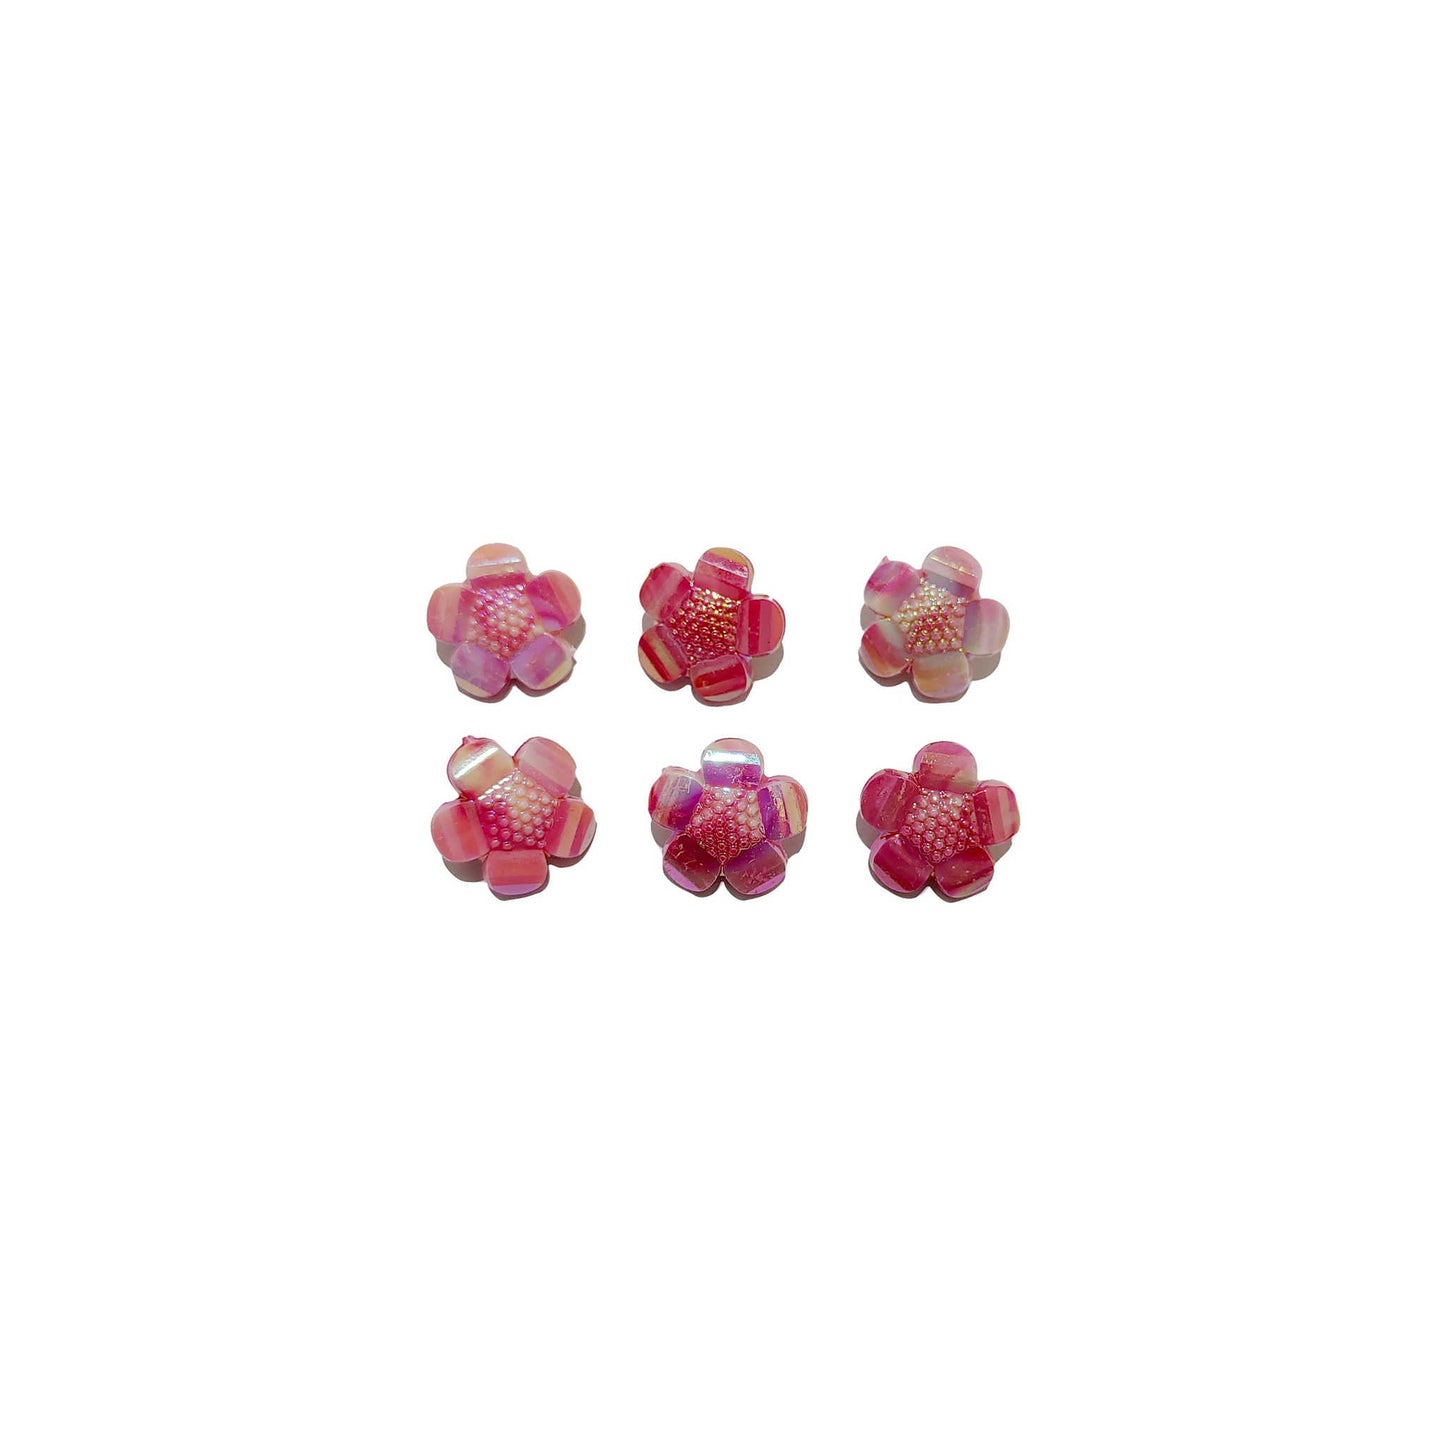 Indian Petals Metallic finish Button Style Beautiful Floral 3D Cabochons Motif for Craft or Decoration - 424, Crimson